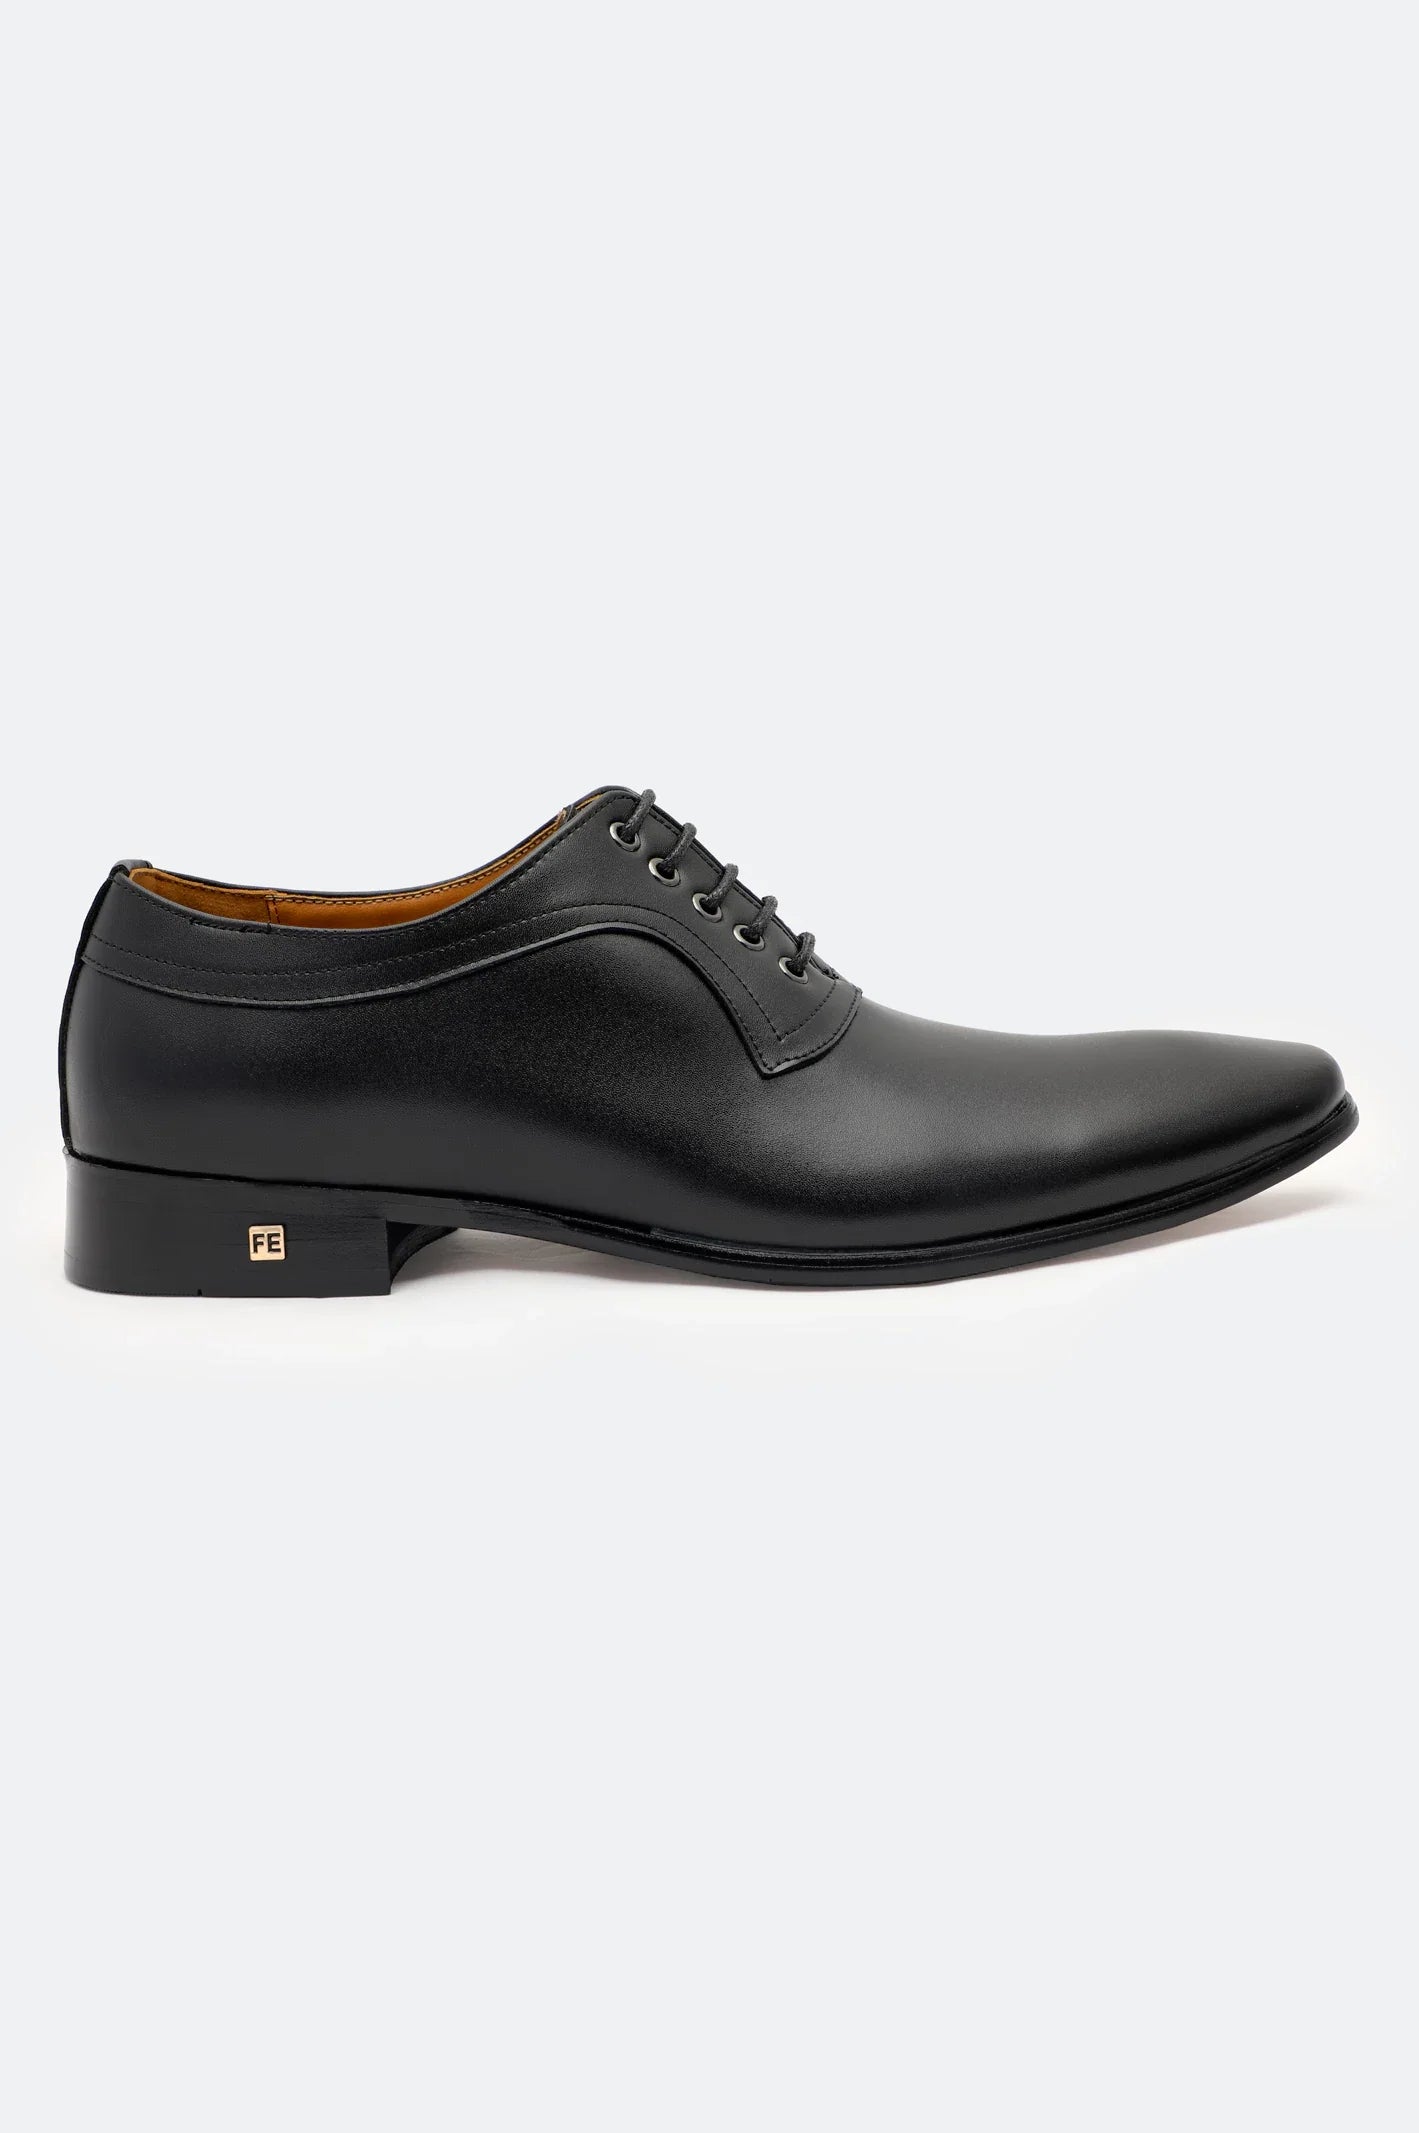 Black Formal Oxford Shoes Premium Shoes From French Emporio By Diners